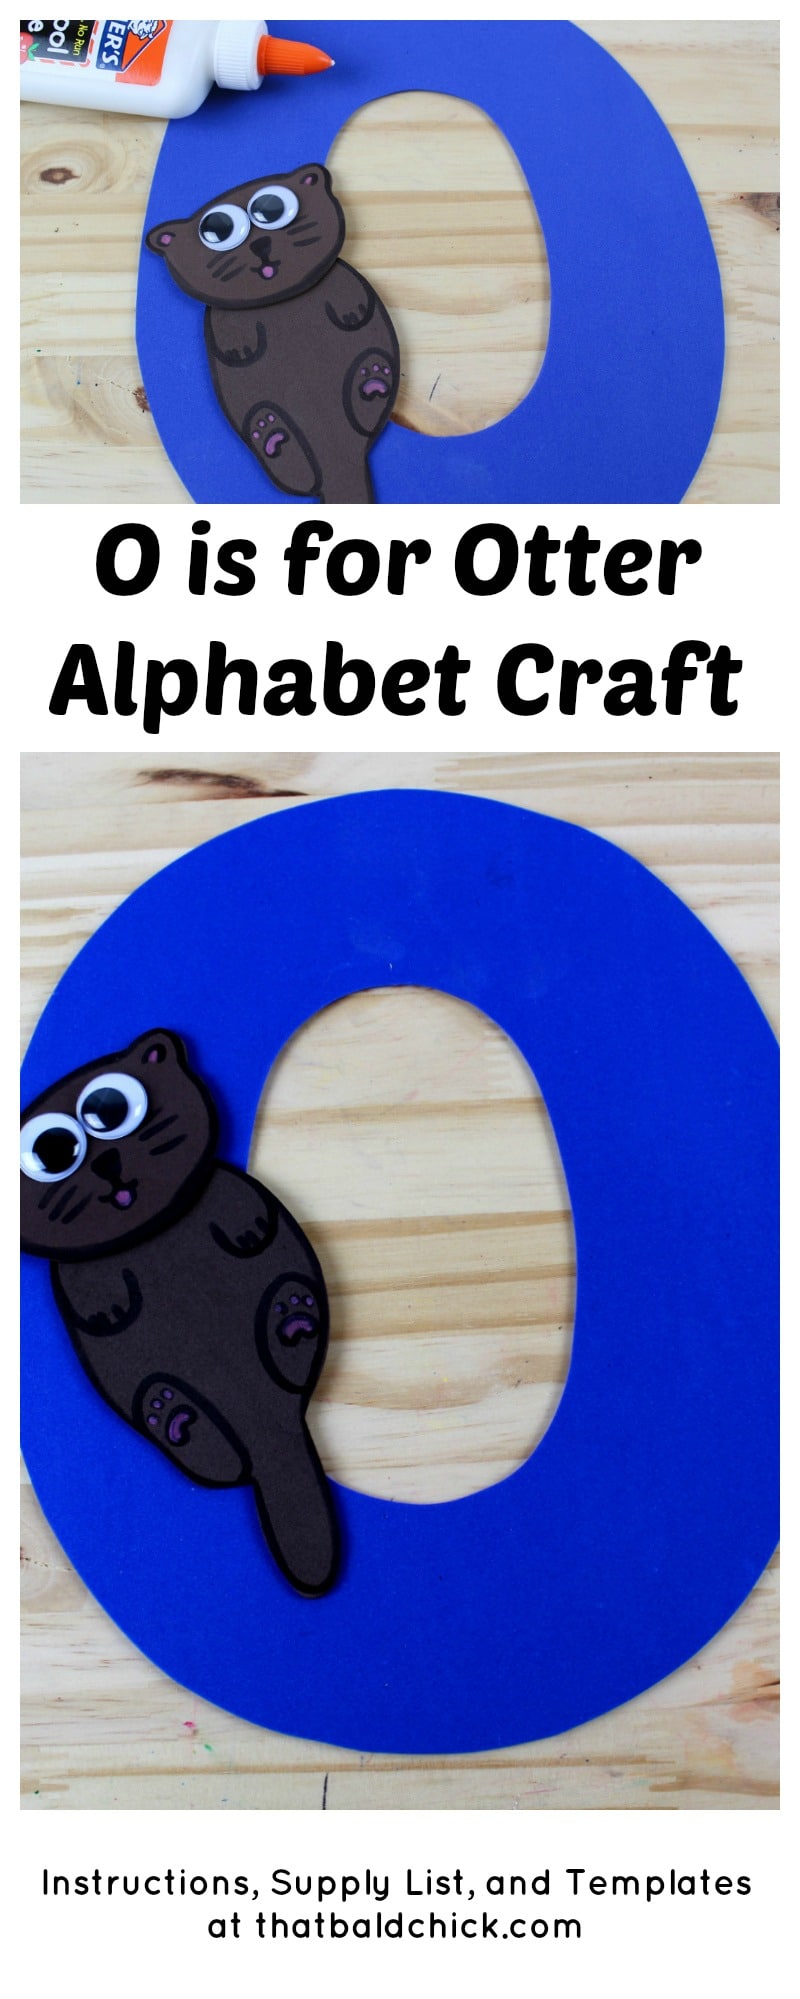 O is for Otter Alphabet Craft - supply list, instructions, and templates at thatbaldchick.com